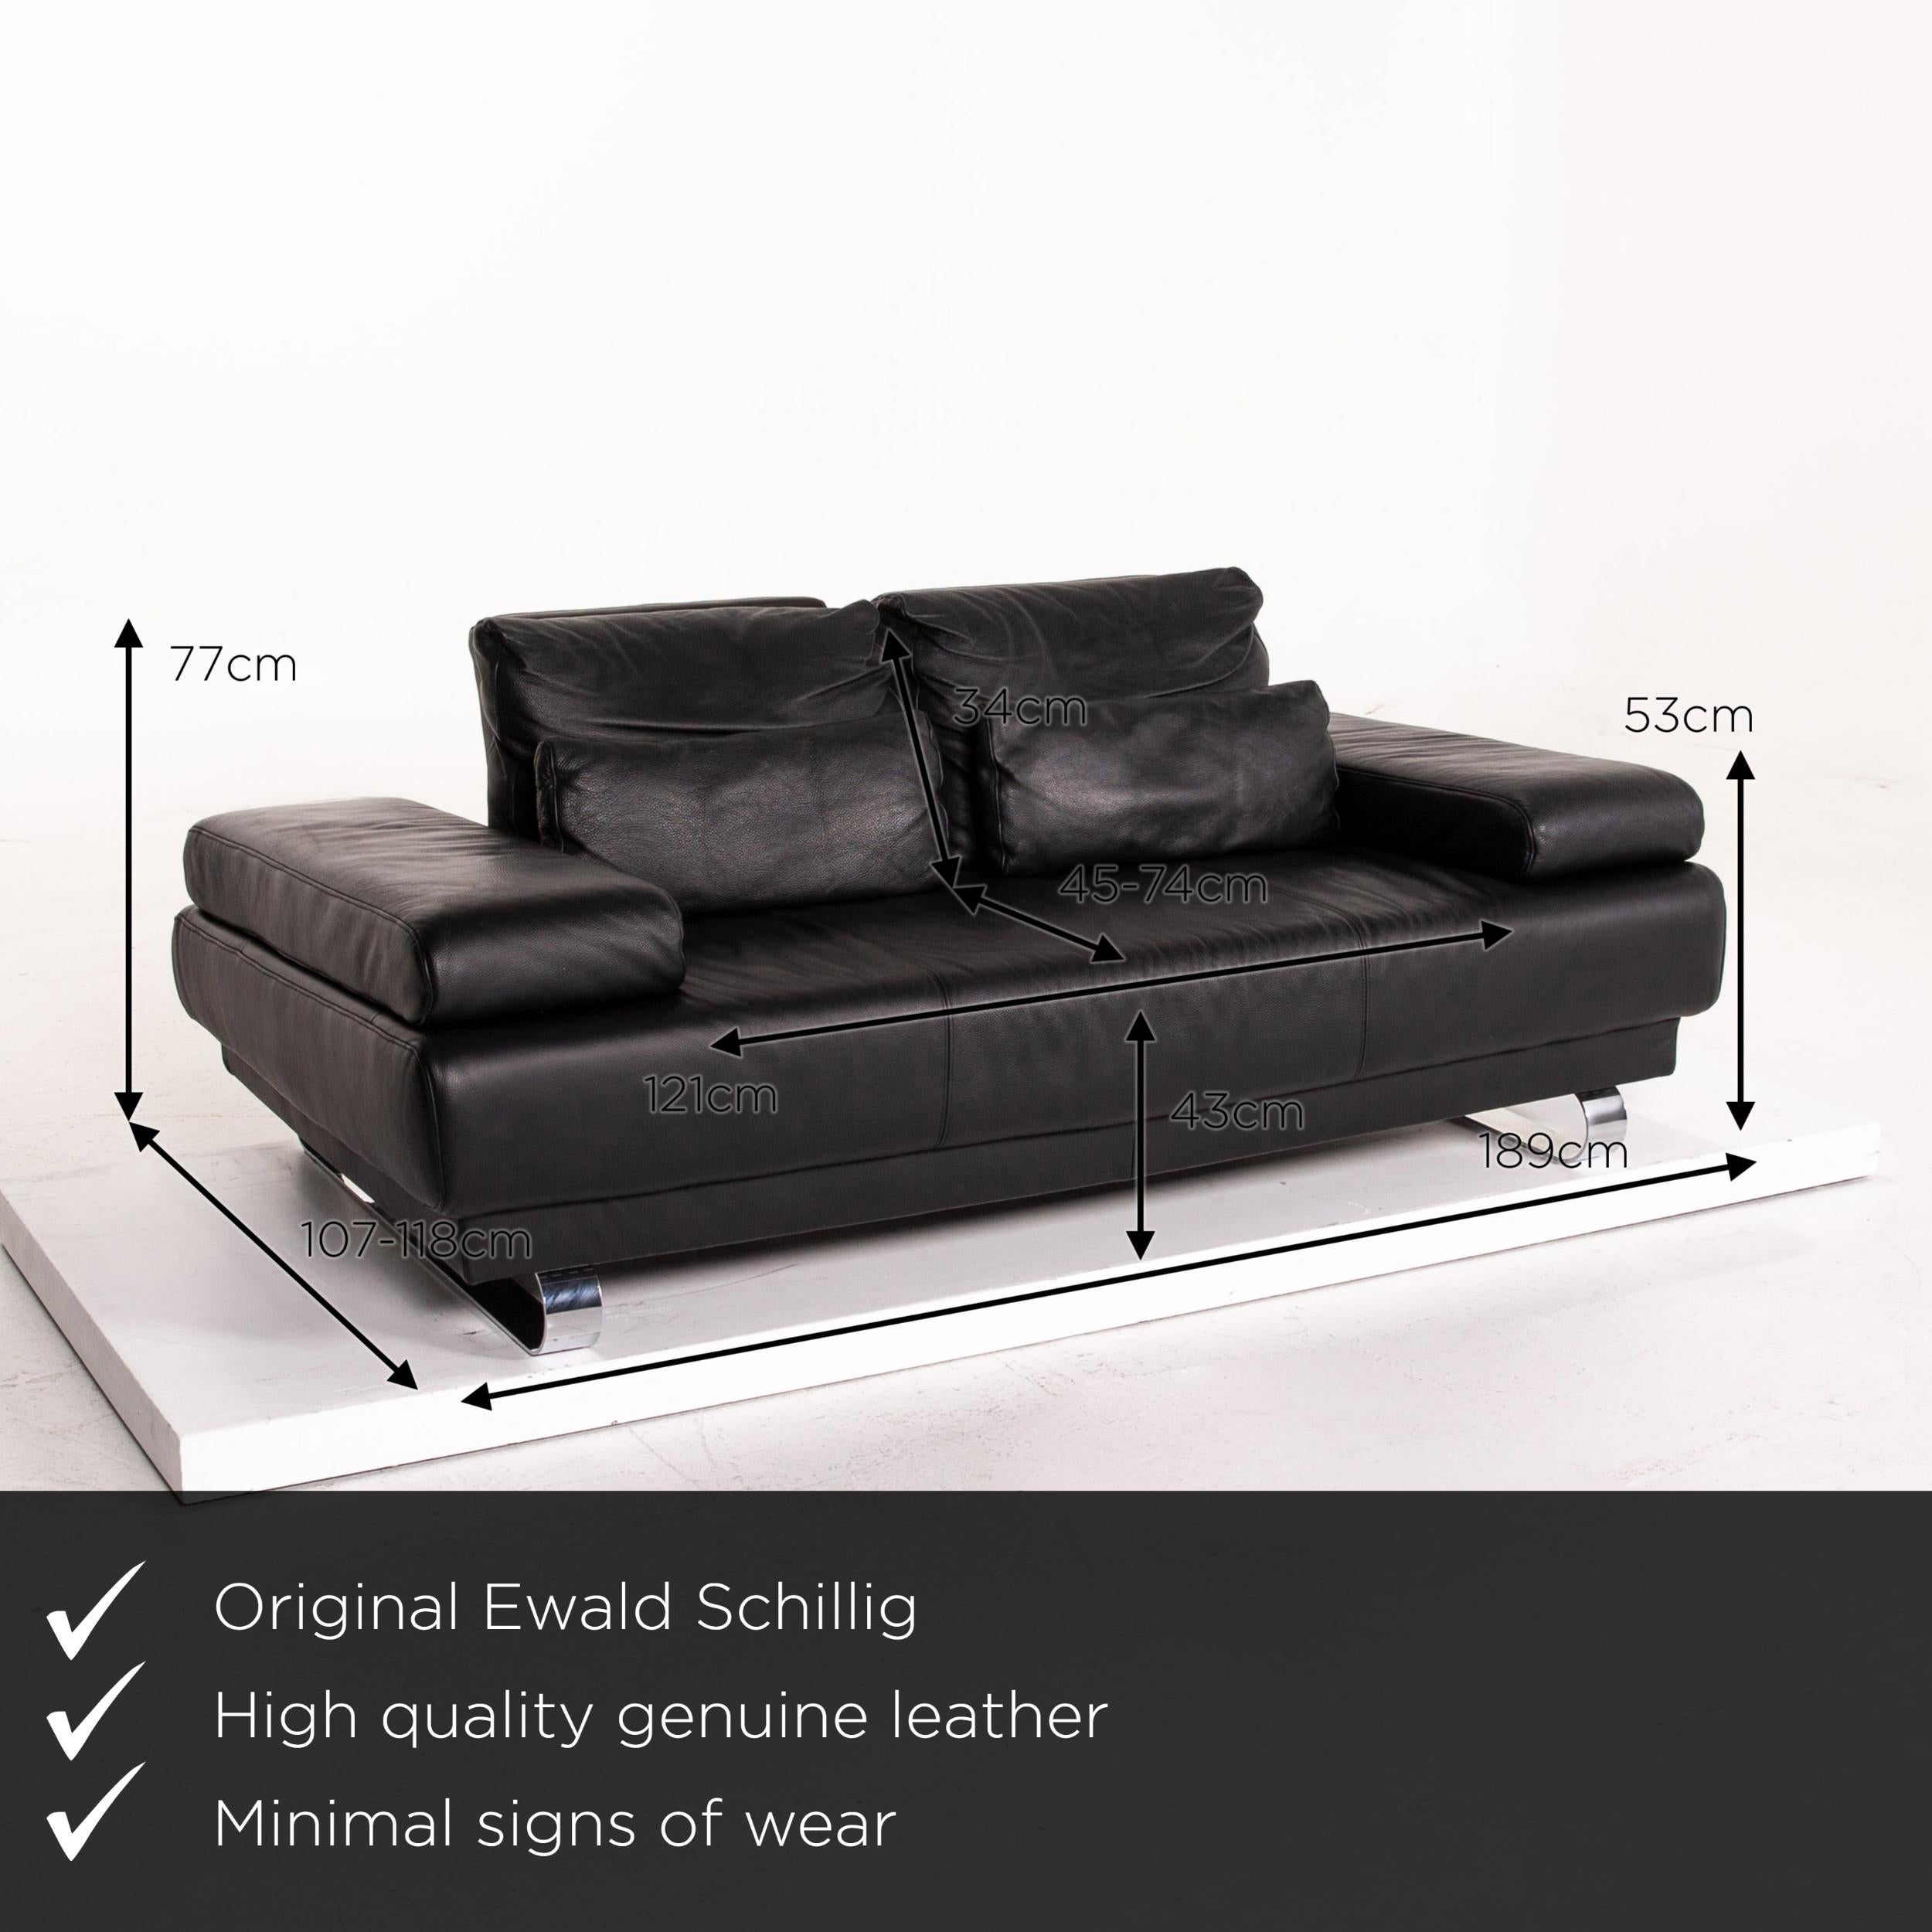 We present to you a Ewald Schillig Harry leather sofa black two-seat function couch.

 

 Product measurements in centimeters:
 

Depth 107
Width 189
Height 77
Seat height 43
Rest height 53
Seat depth 45
Seat width 121
Back height 34.